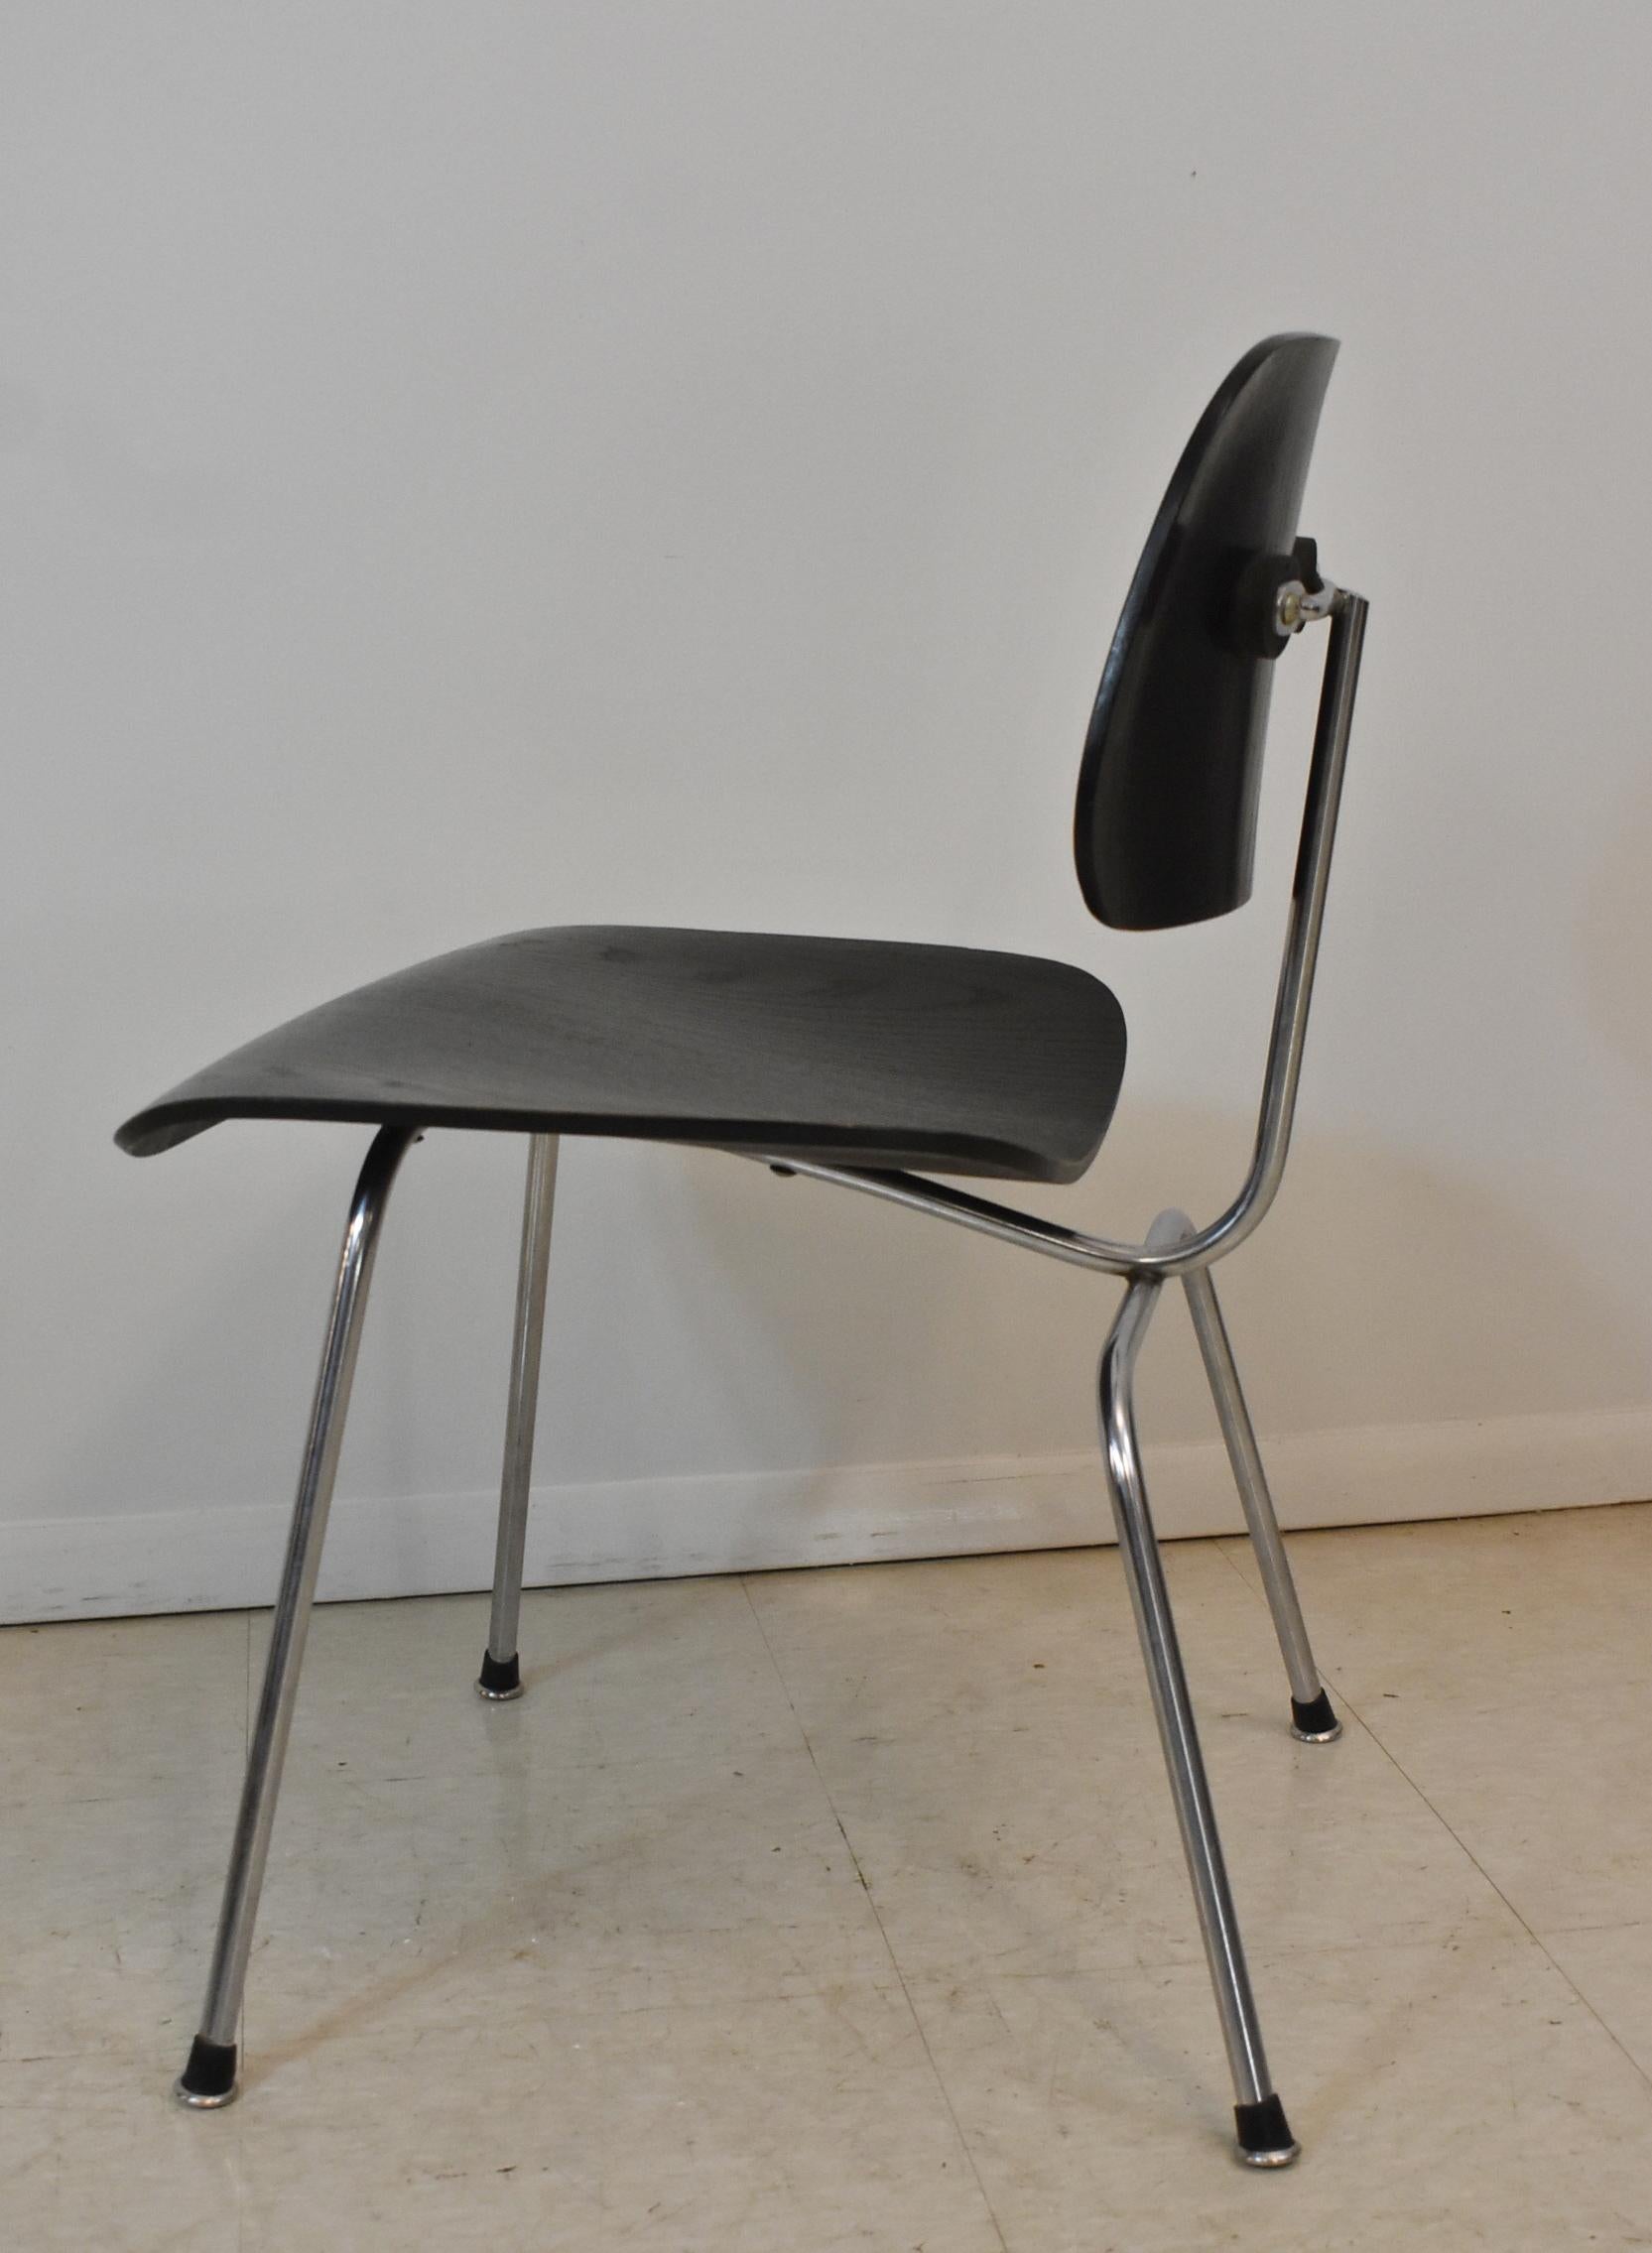 North American Mid-Century Modern Ebonized Wood and Chrome DCM Eames Chair For Sale